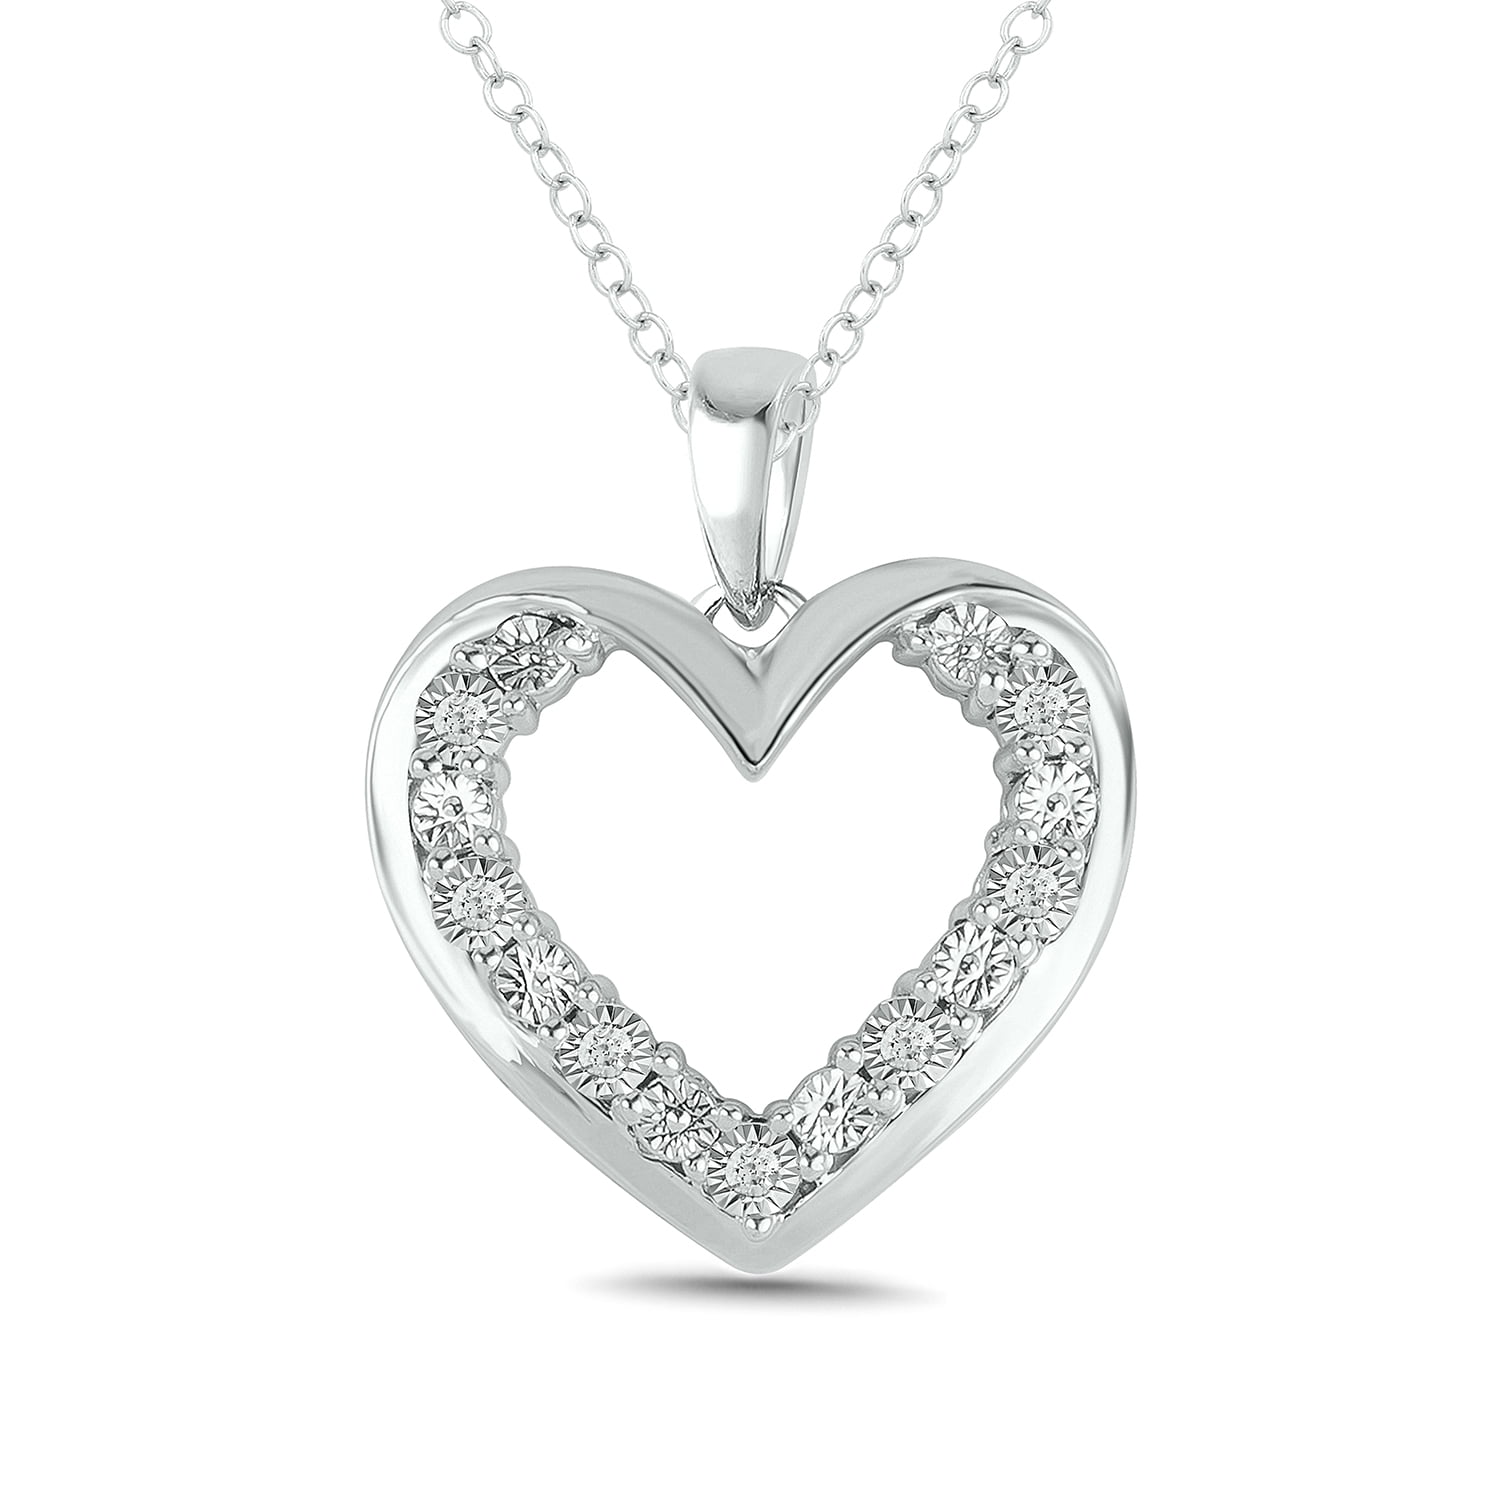 Cali Trove Yellow Gold Plated Sterling Silver Round White Diamond Accent Heart Pendant Necklace 